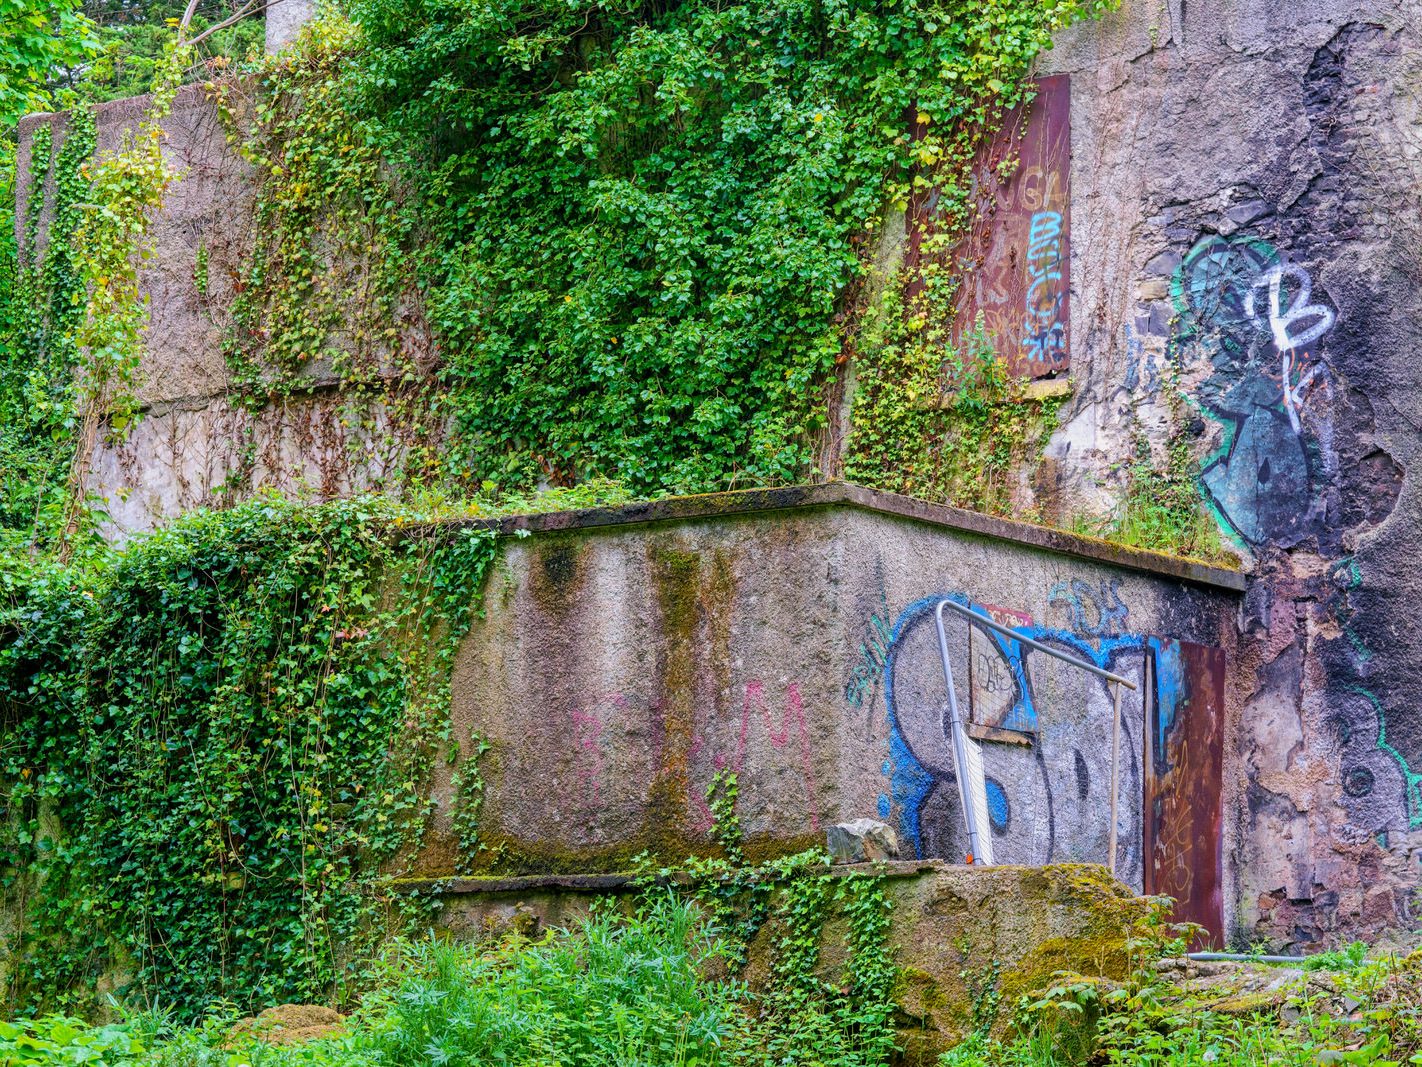 NEAR FARMLEIGH BRIDGE AND THE OLD HARRIS'S HOUSE [TWO DERELICT STRUCTURES AT WATERSTOWN PARK IN PALMERSTOWN]-232562-1